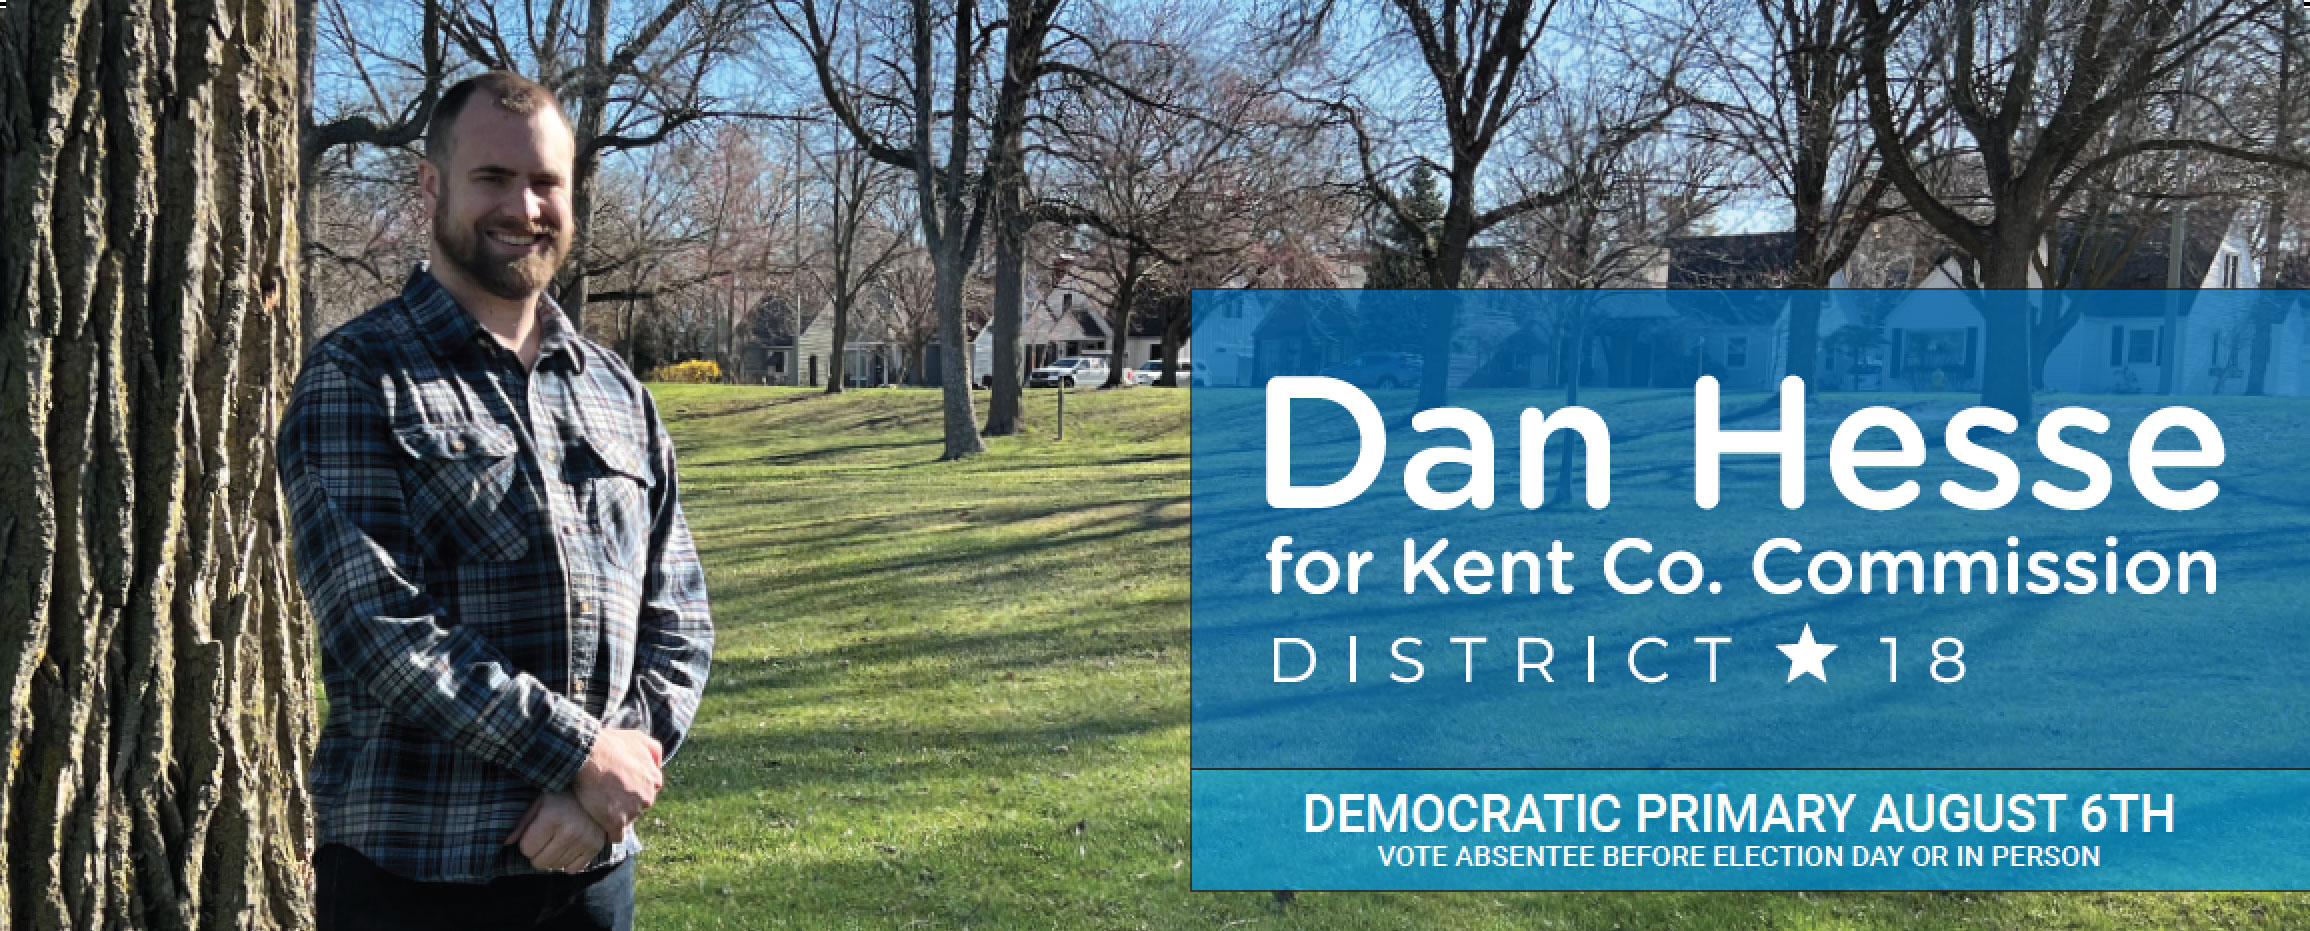 Dan Hesse for Kent County Commissioner - Vote in the Democratic Primary August 6th